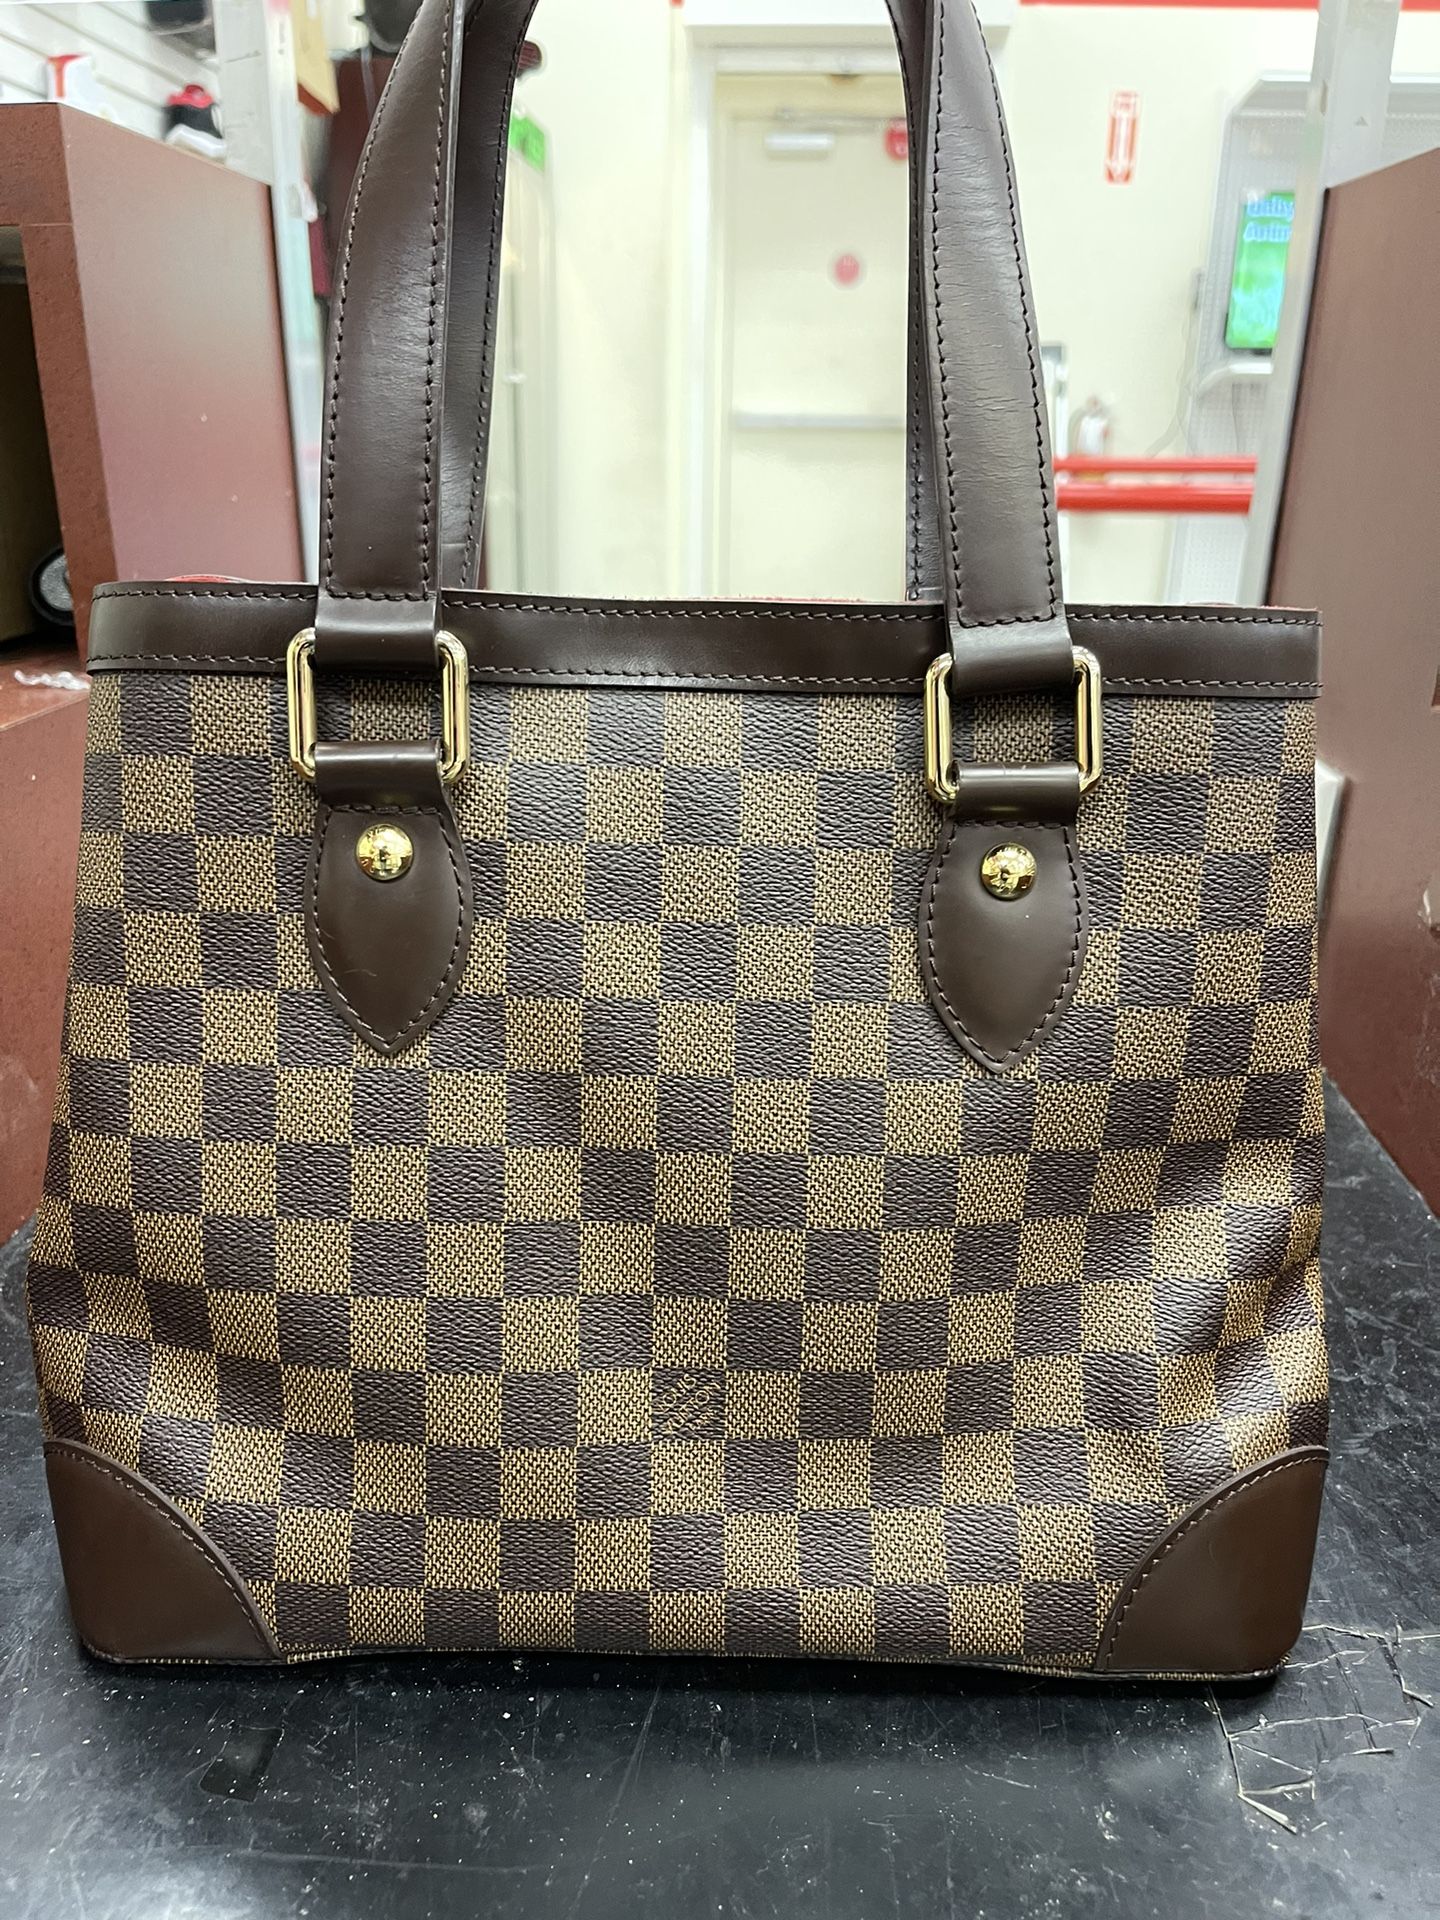 Authentic Louis Vuitton Hampstead Bag for Sale in Miami, FL - OfferUp